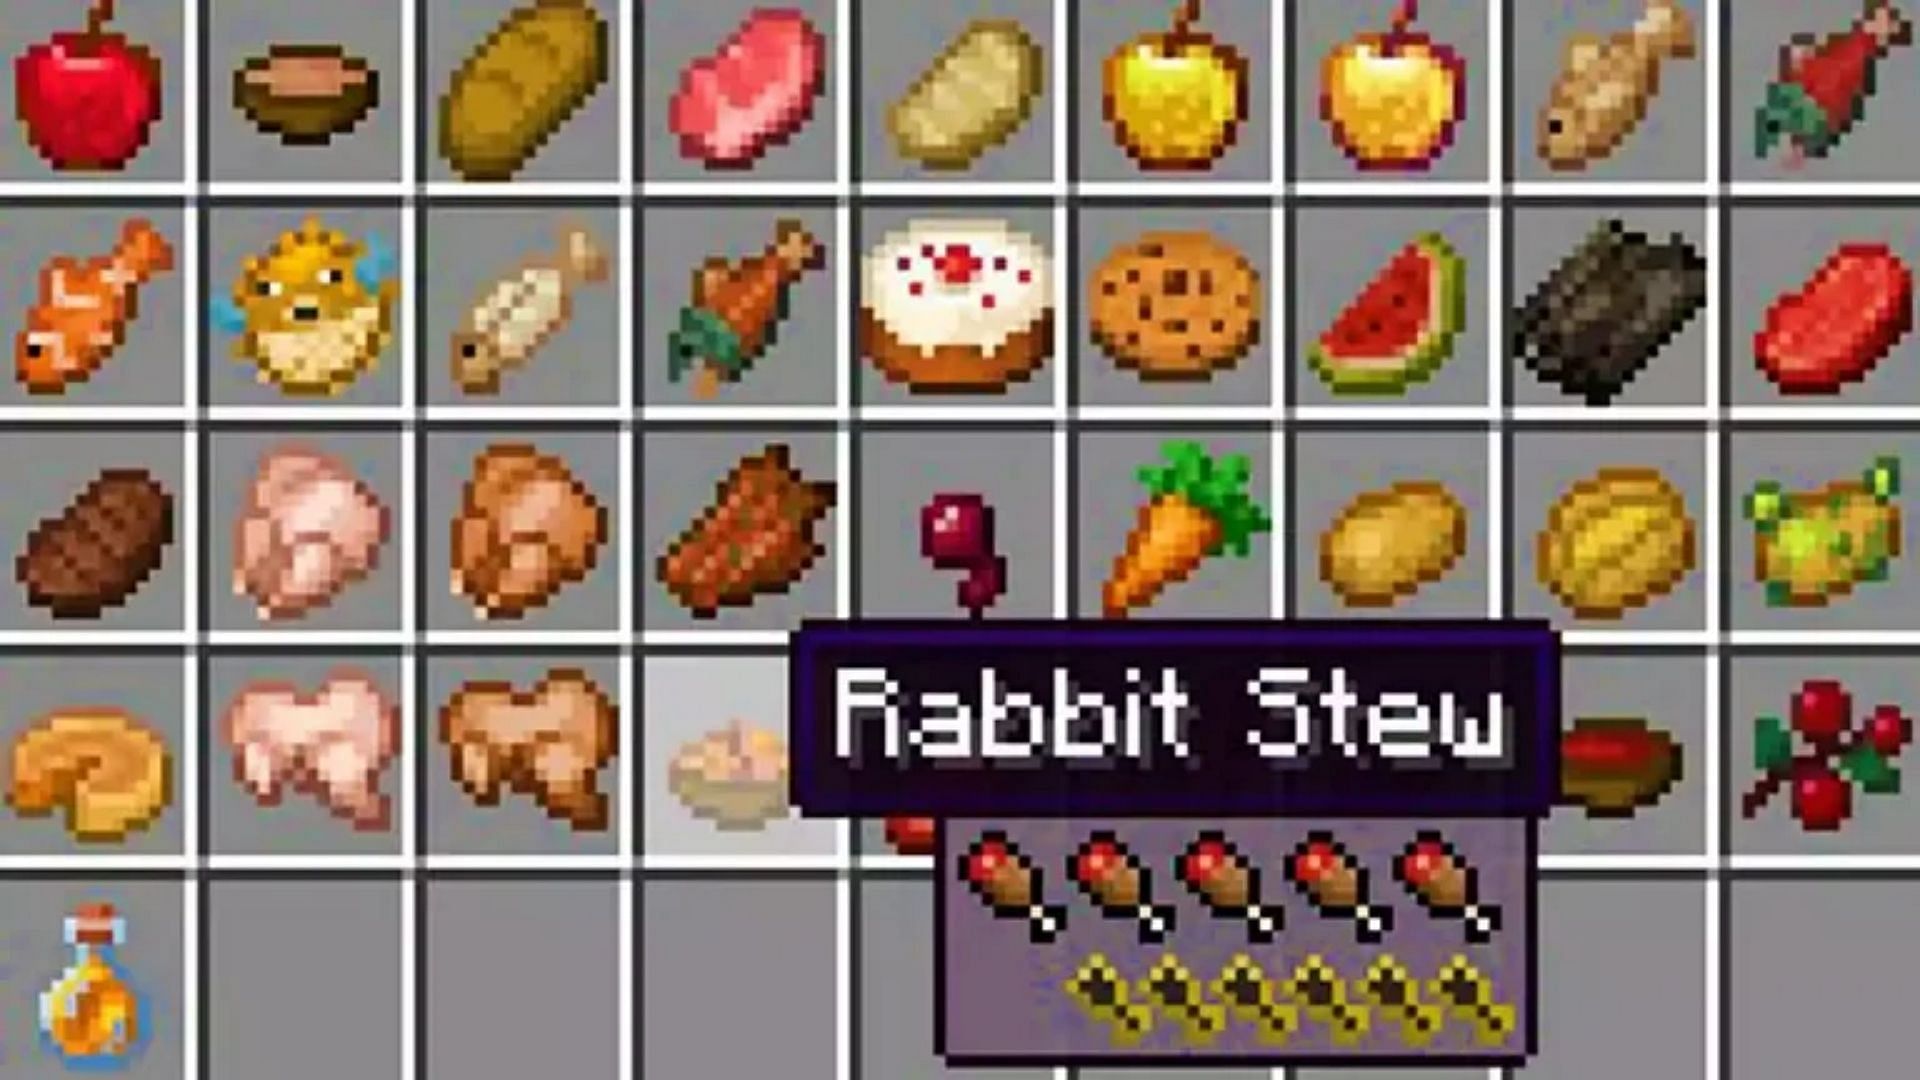 AppleSkin mod shows more detailed information about food (Image via bestminecraftmods.net)